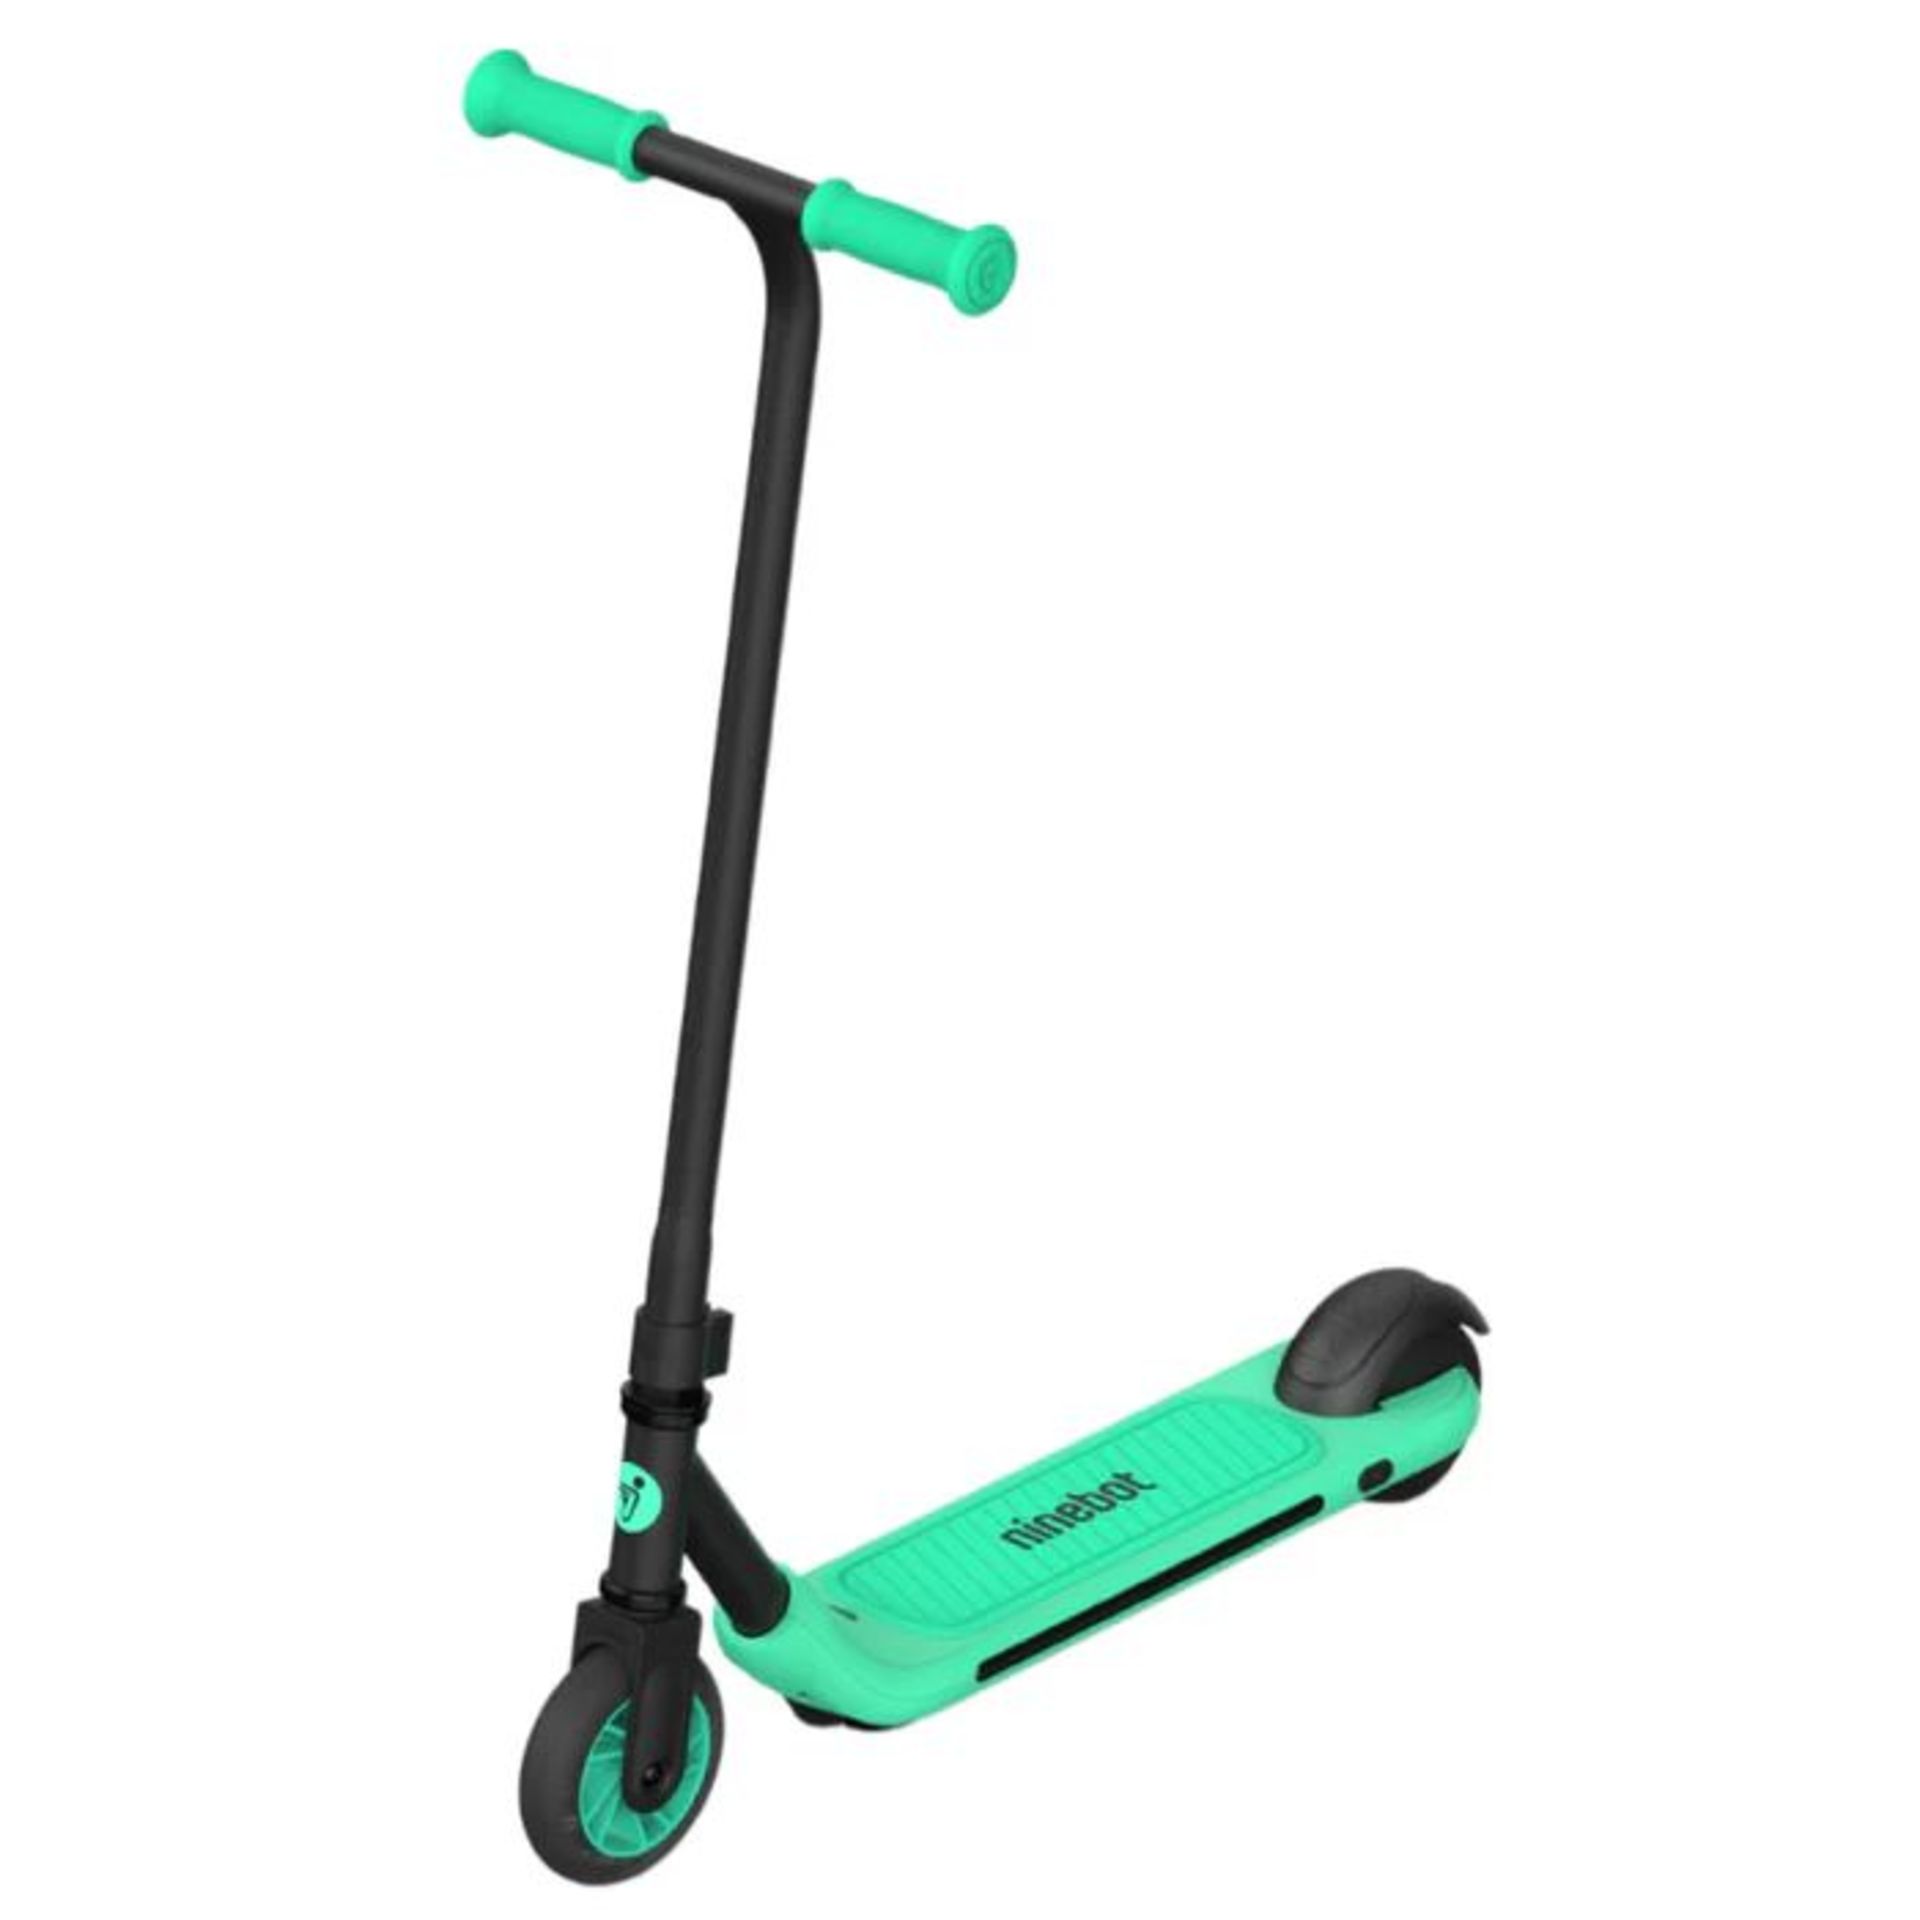 UNITS - SEGWAY NINEBOT ELECTRIC ASSIST E-KICK SCOOTER (FACTORY RECERTIFIED 30 DAY WARRANTY INCLUDED)